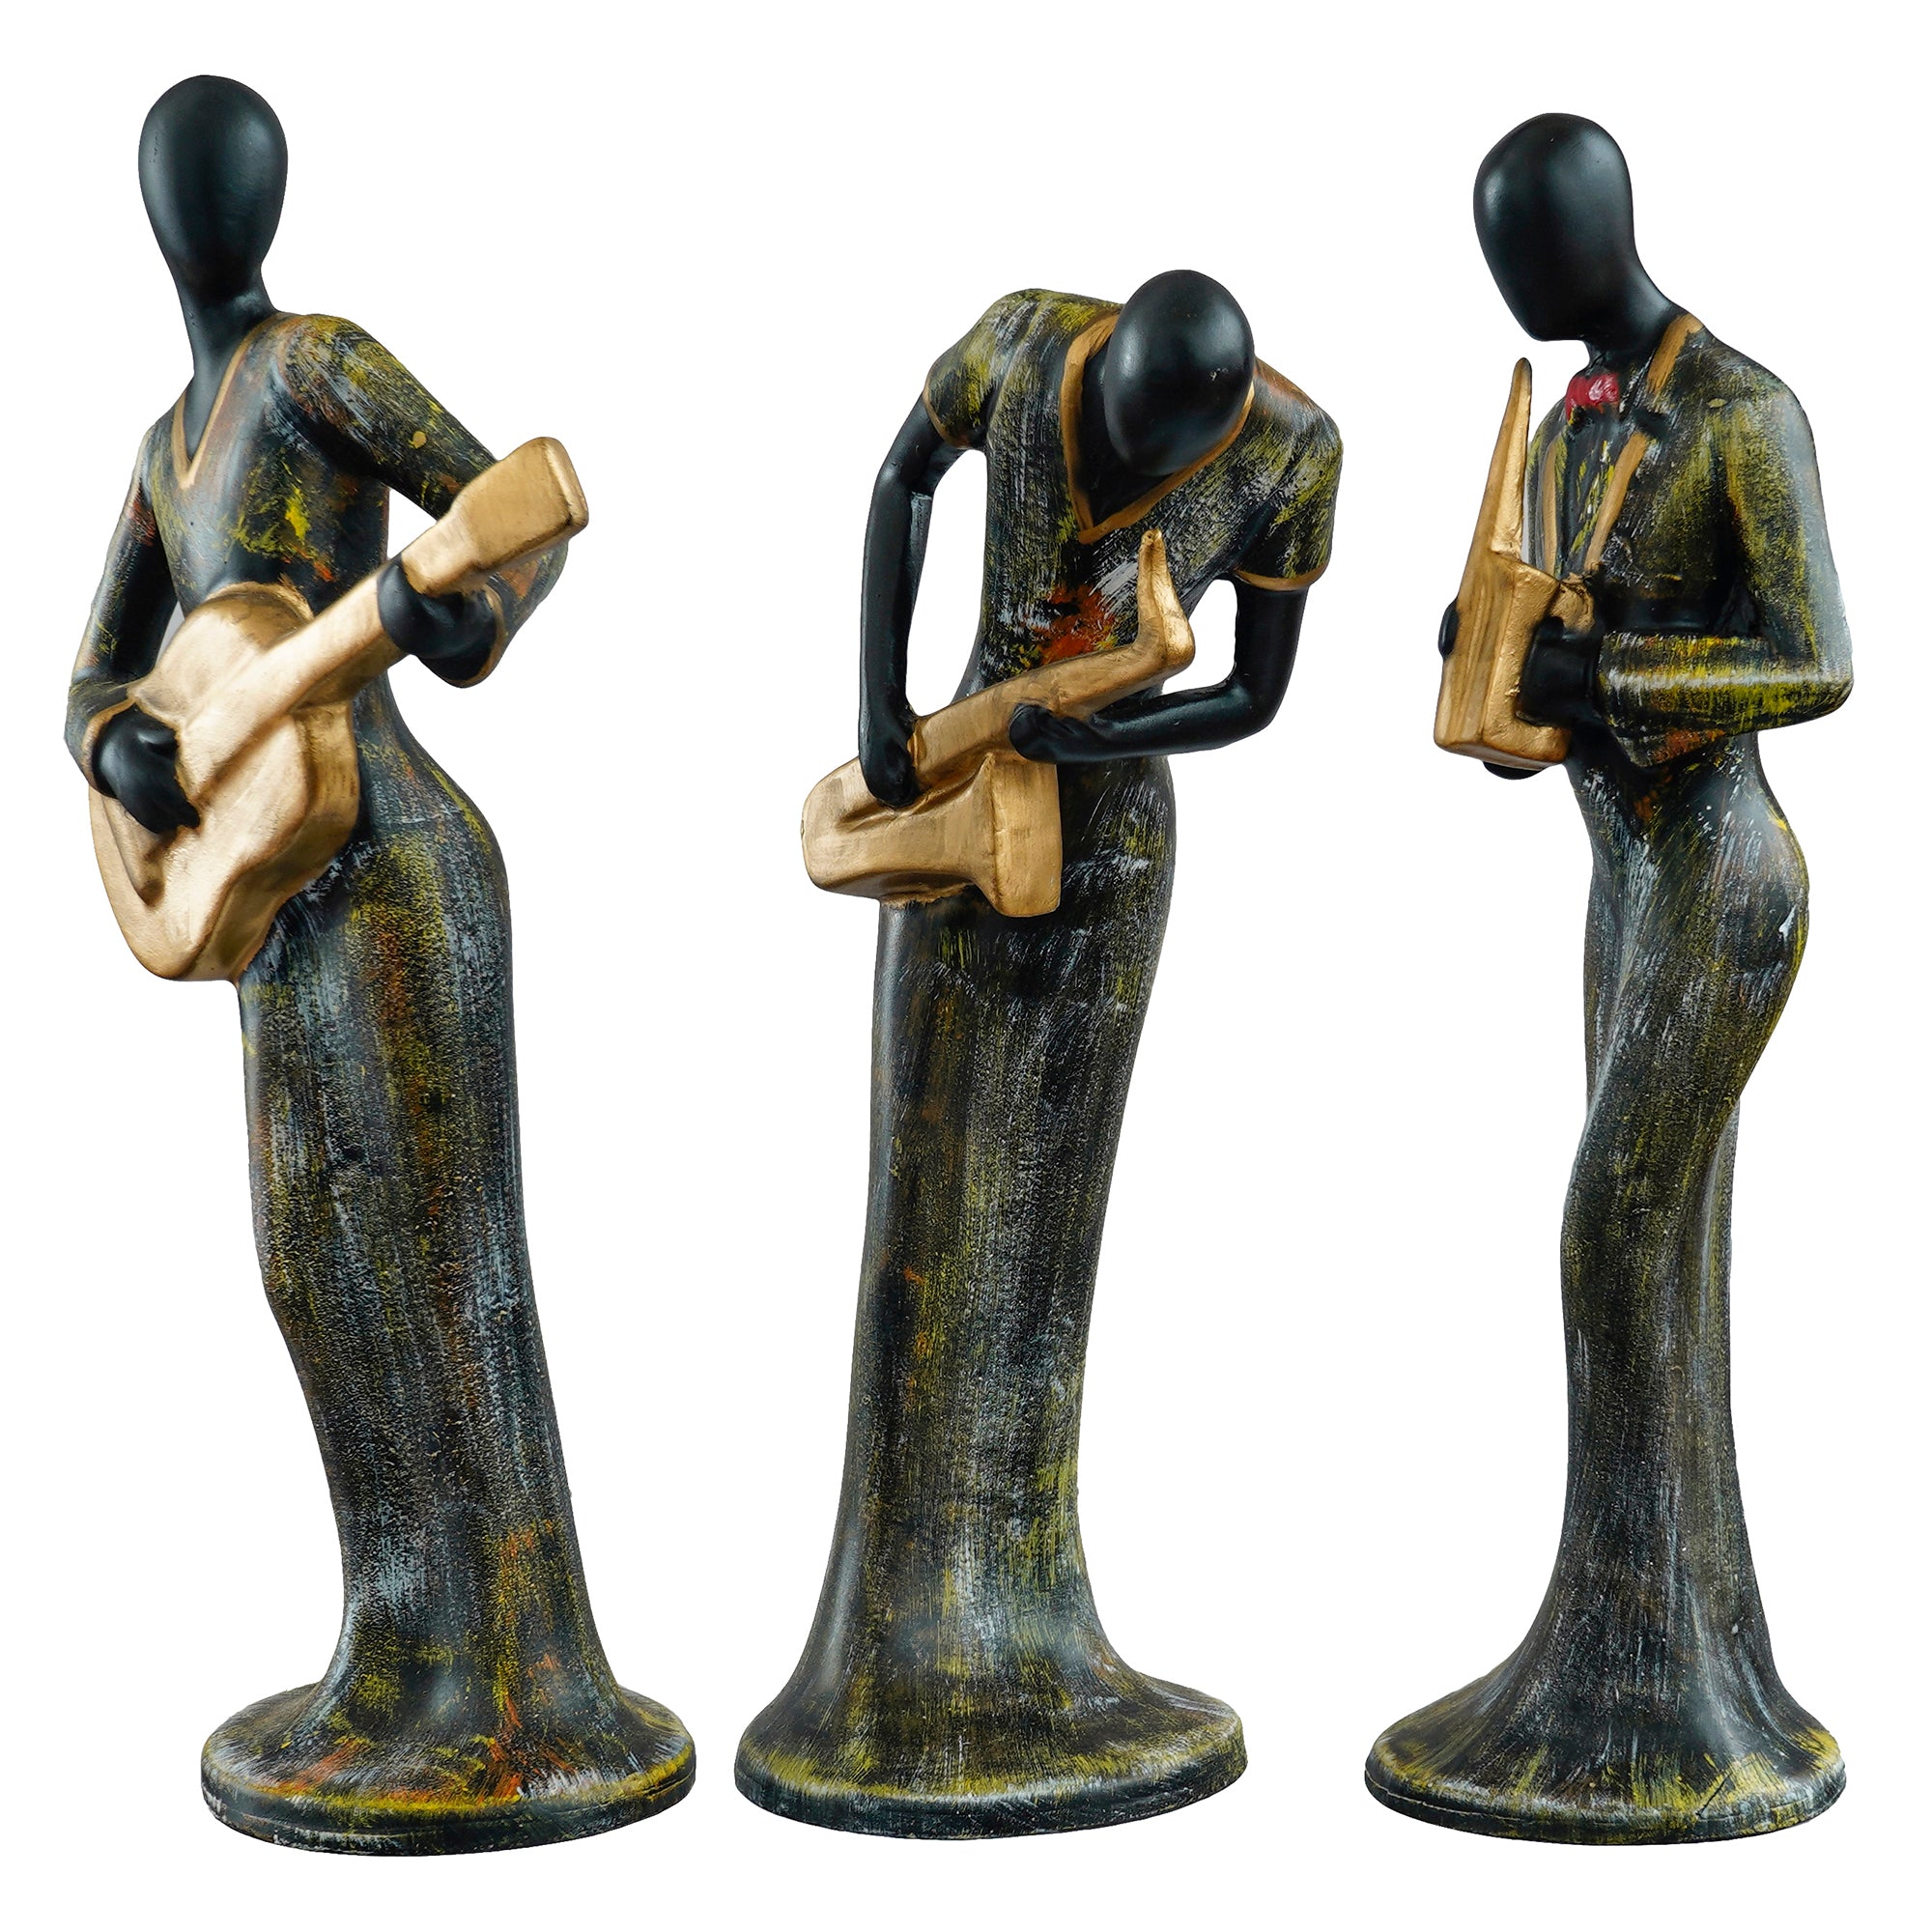 Grey and Black Polyresin Set of 3 Ladies figurines Playing Wind, Guitar,Saxophone Musical Instrument Handcrafted Decorative Showpiece 5